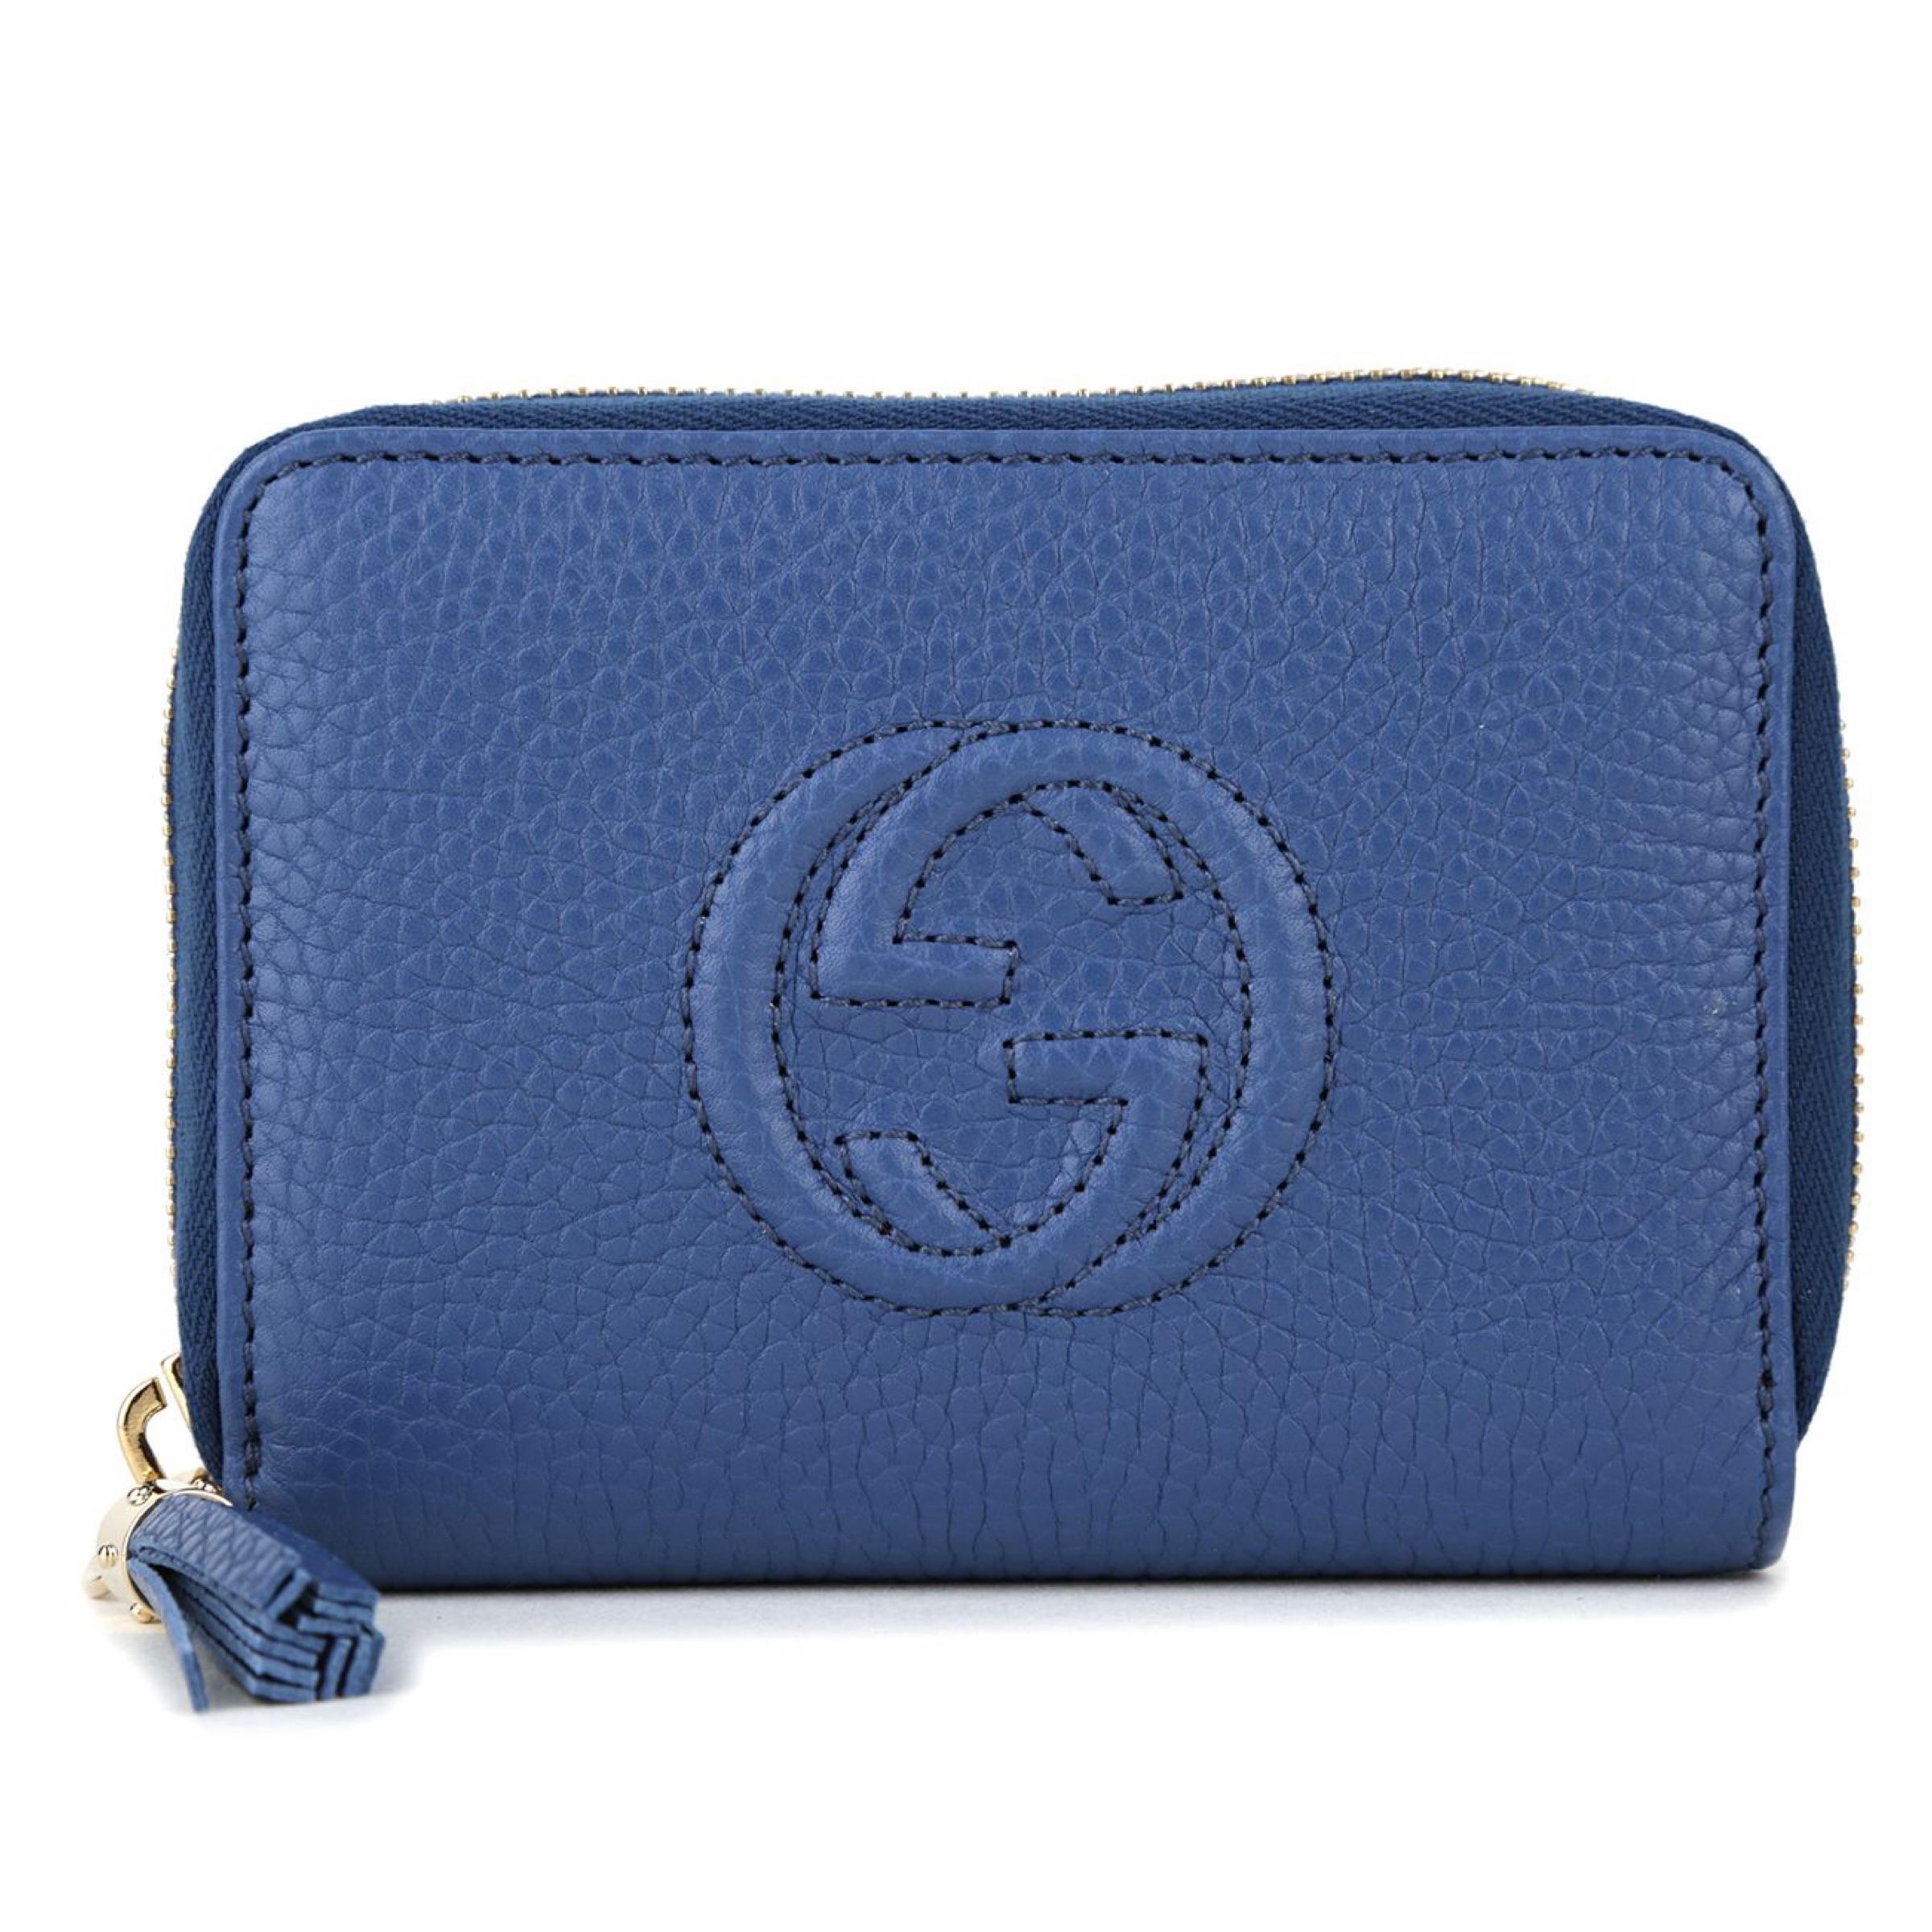 New Gucci Blue Soho Small Leather Coin Purse Wallet

Authenticity Guaranteed

DETAILS
Brand: Gucci
Condition: Brand new
Color: Blue
Material: leather
Gucci soho logo
Gold-tone hardware
Zip around closure
2 main compartments
1 zip coin pouch
4 card